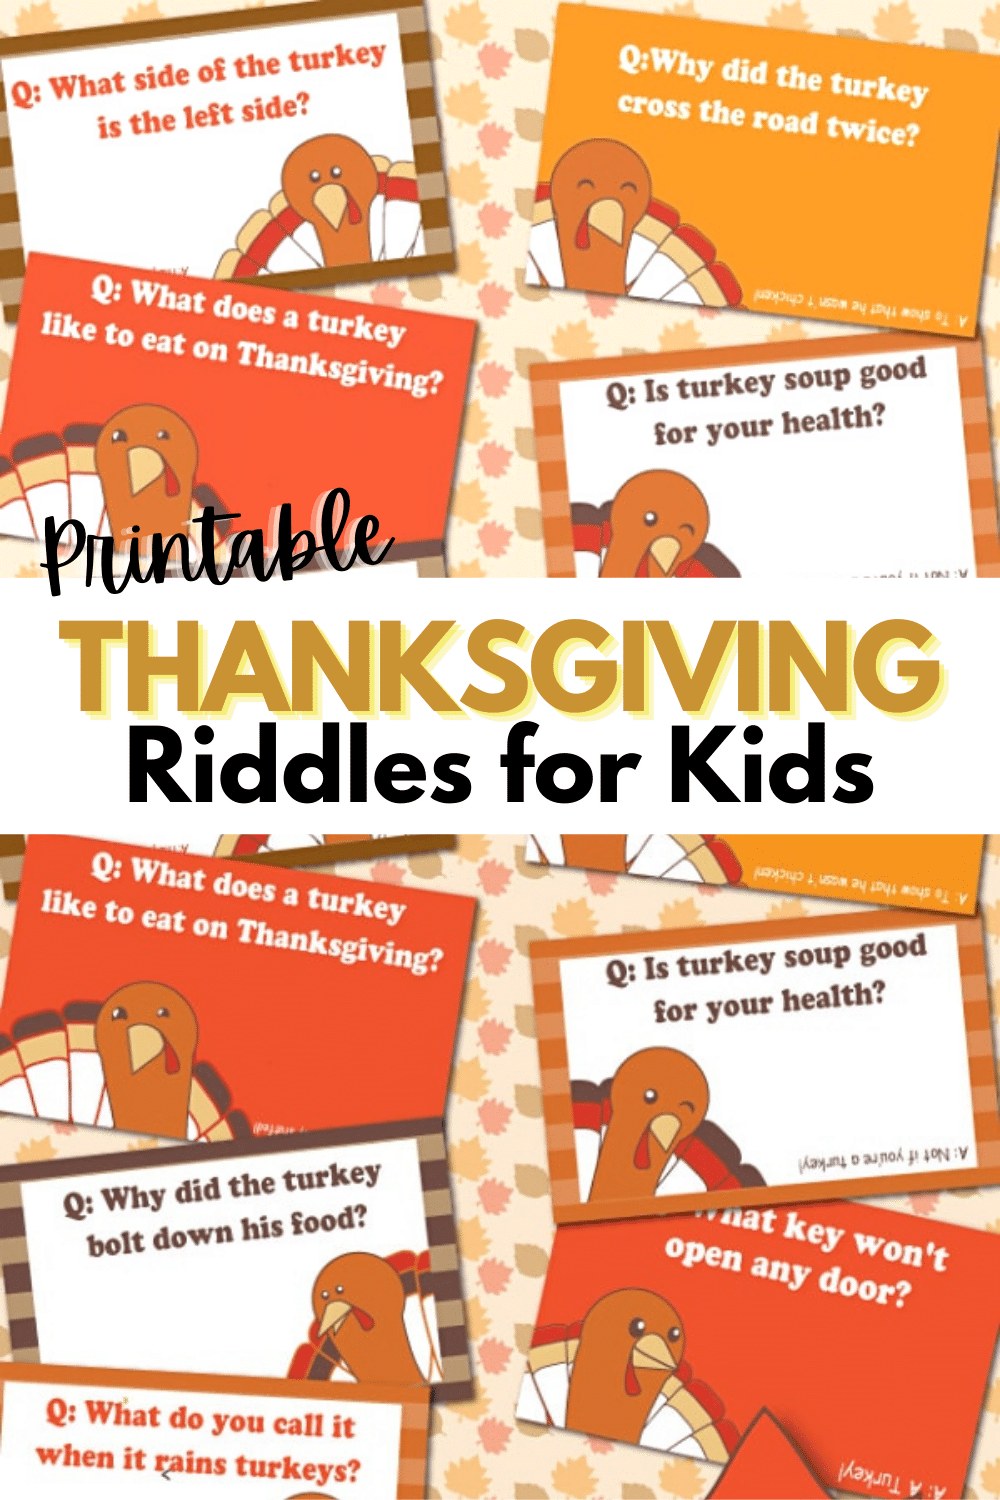 These funny printable Thanksgiving riddles are perfect for kids! Sneak them into their lunchboxes the week leading up to Thanksgiving or use them as place cards at the dinner table. #Thanksgiving #printables #kidjokes via @wondermomwannab